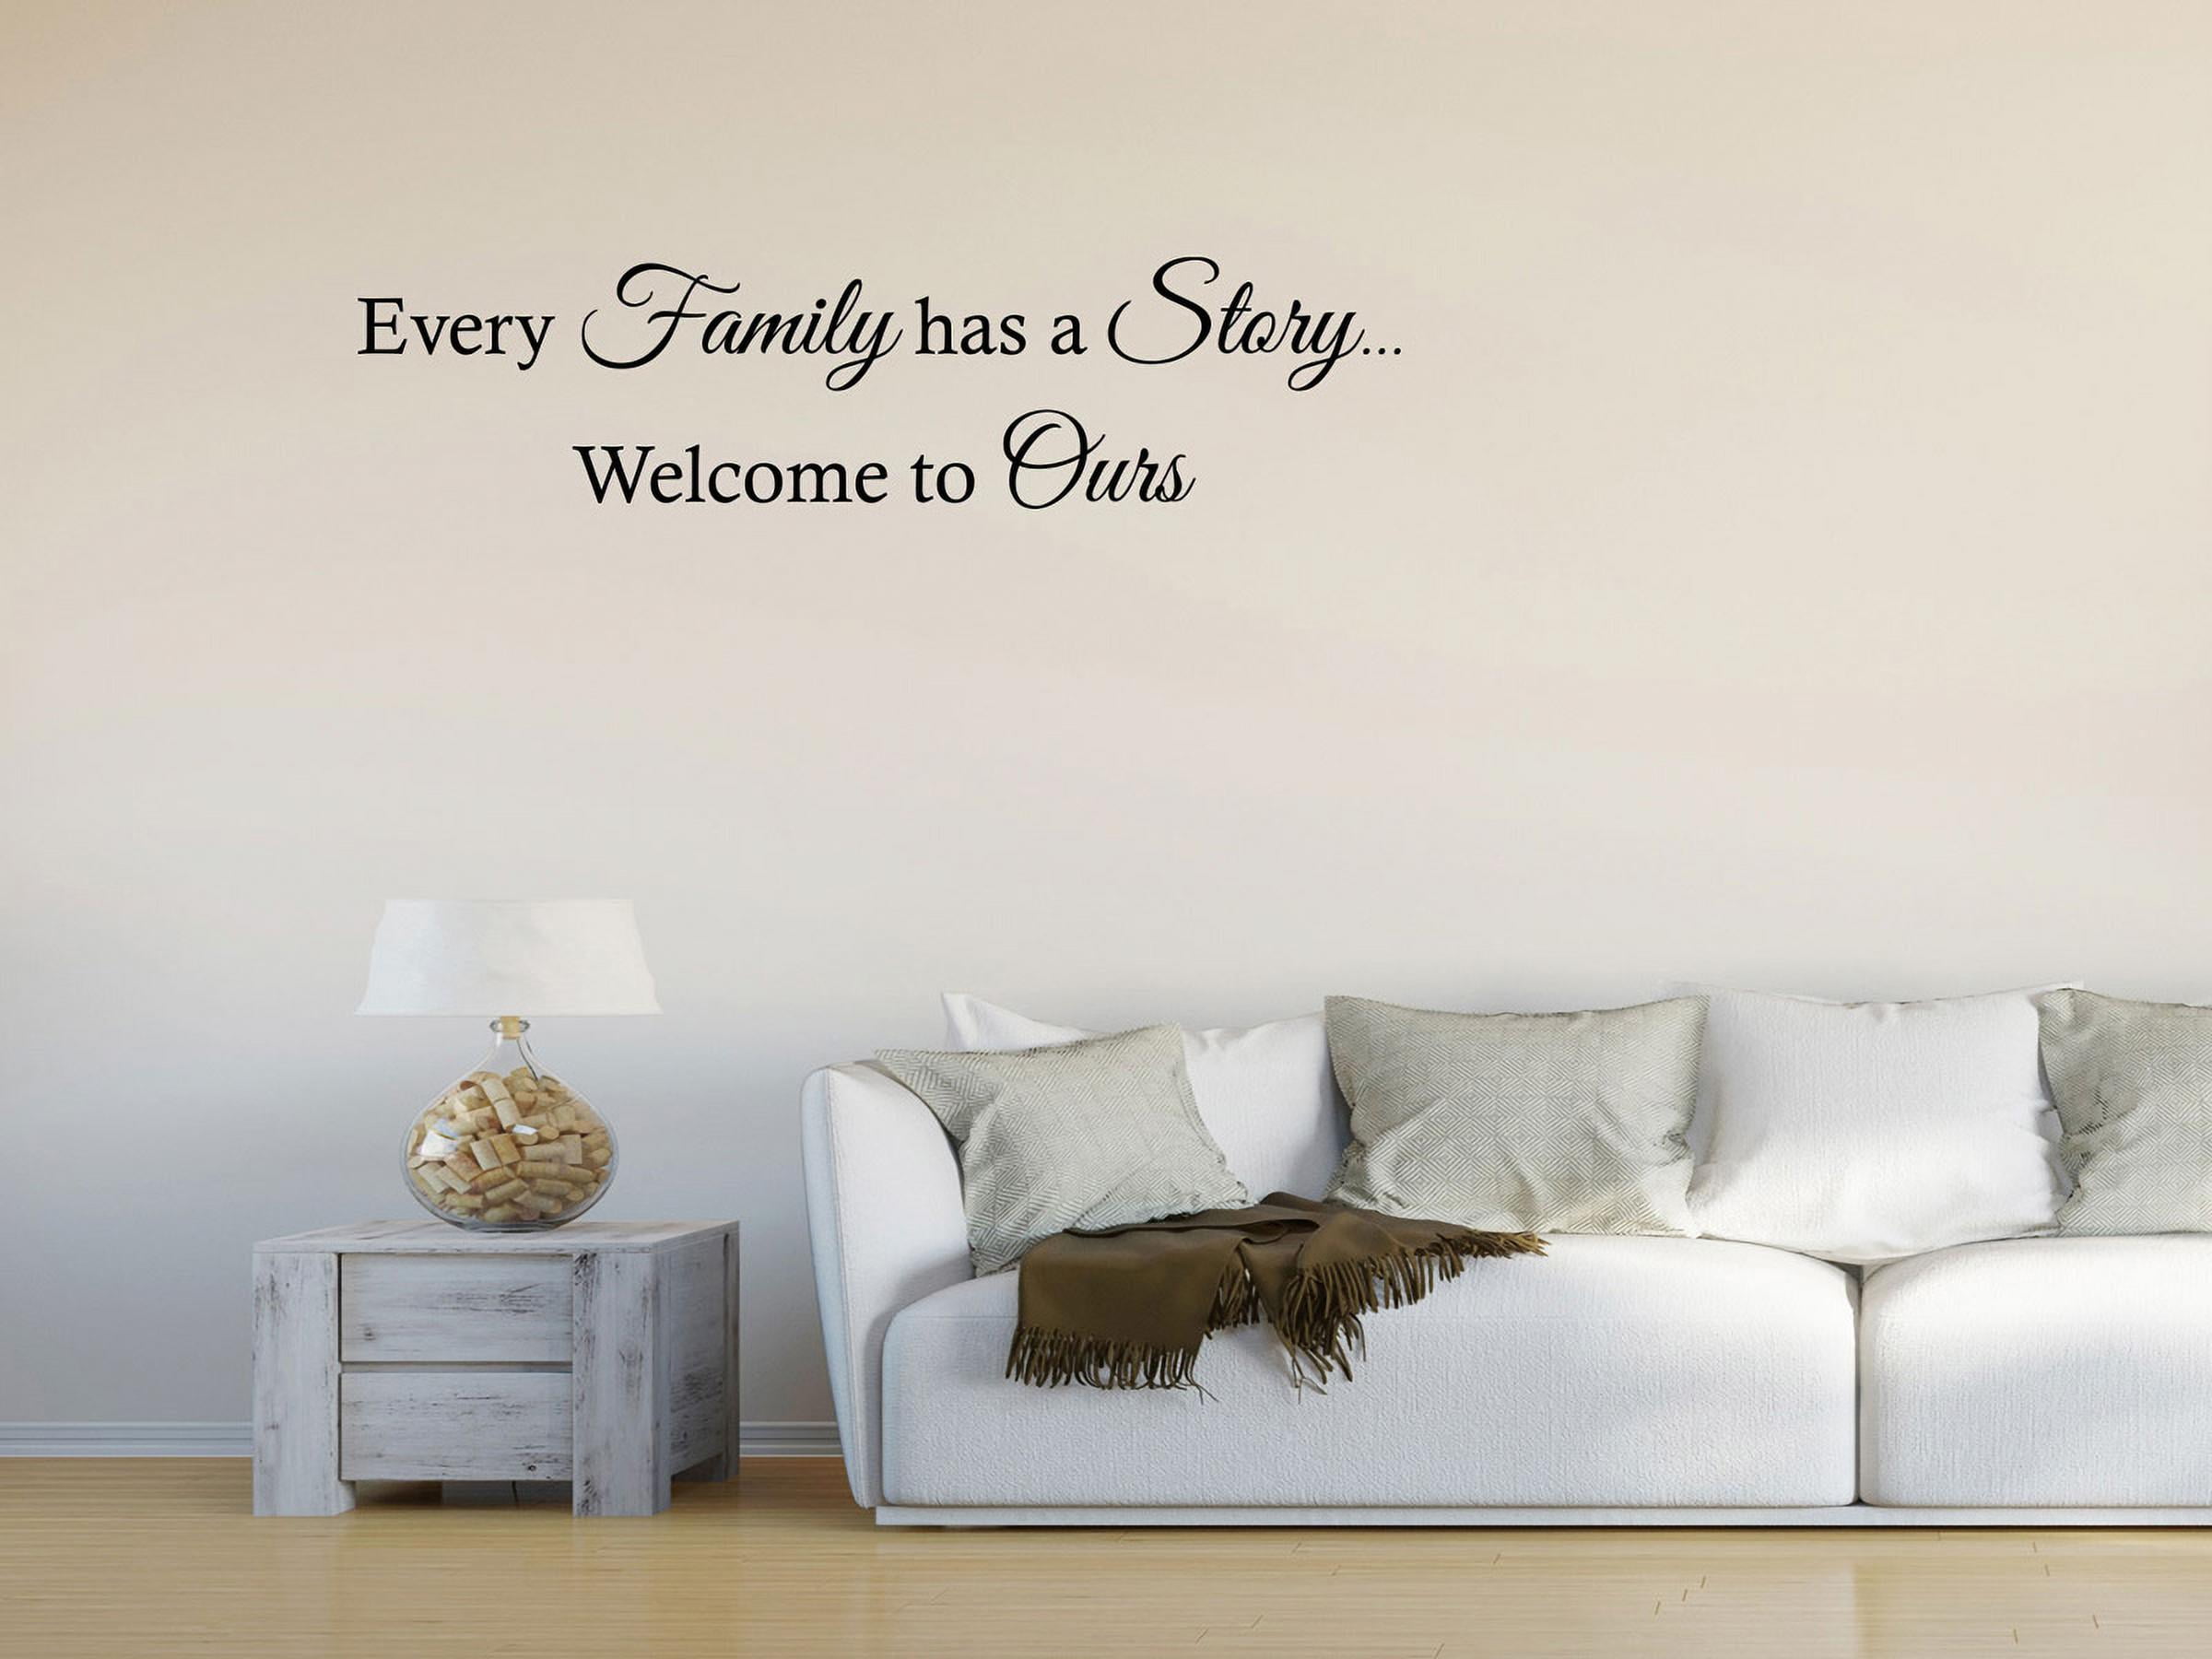 Home Family Blessing Wall Sticker Decal Removable Mural Home Decor Q4V3 